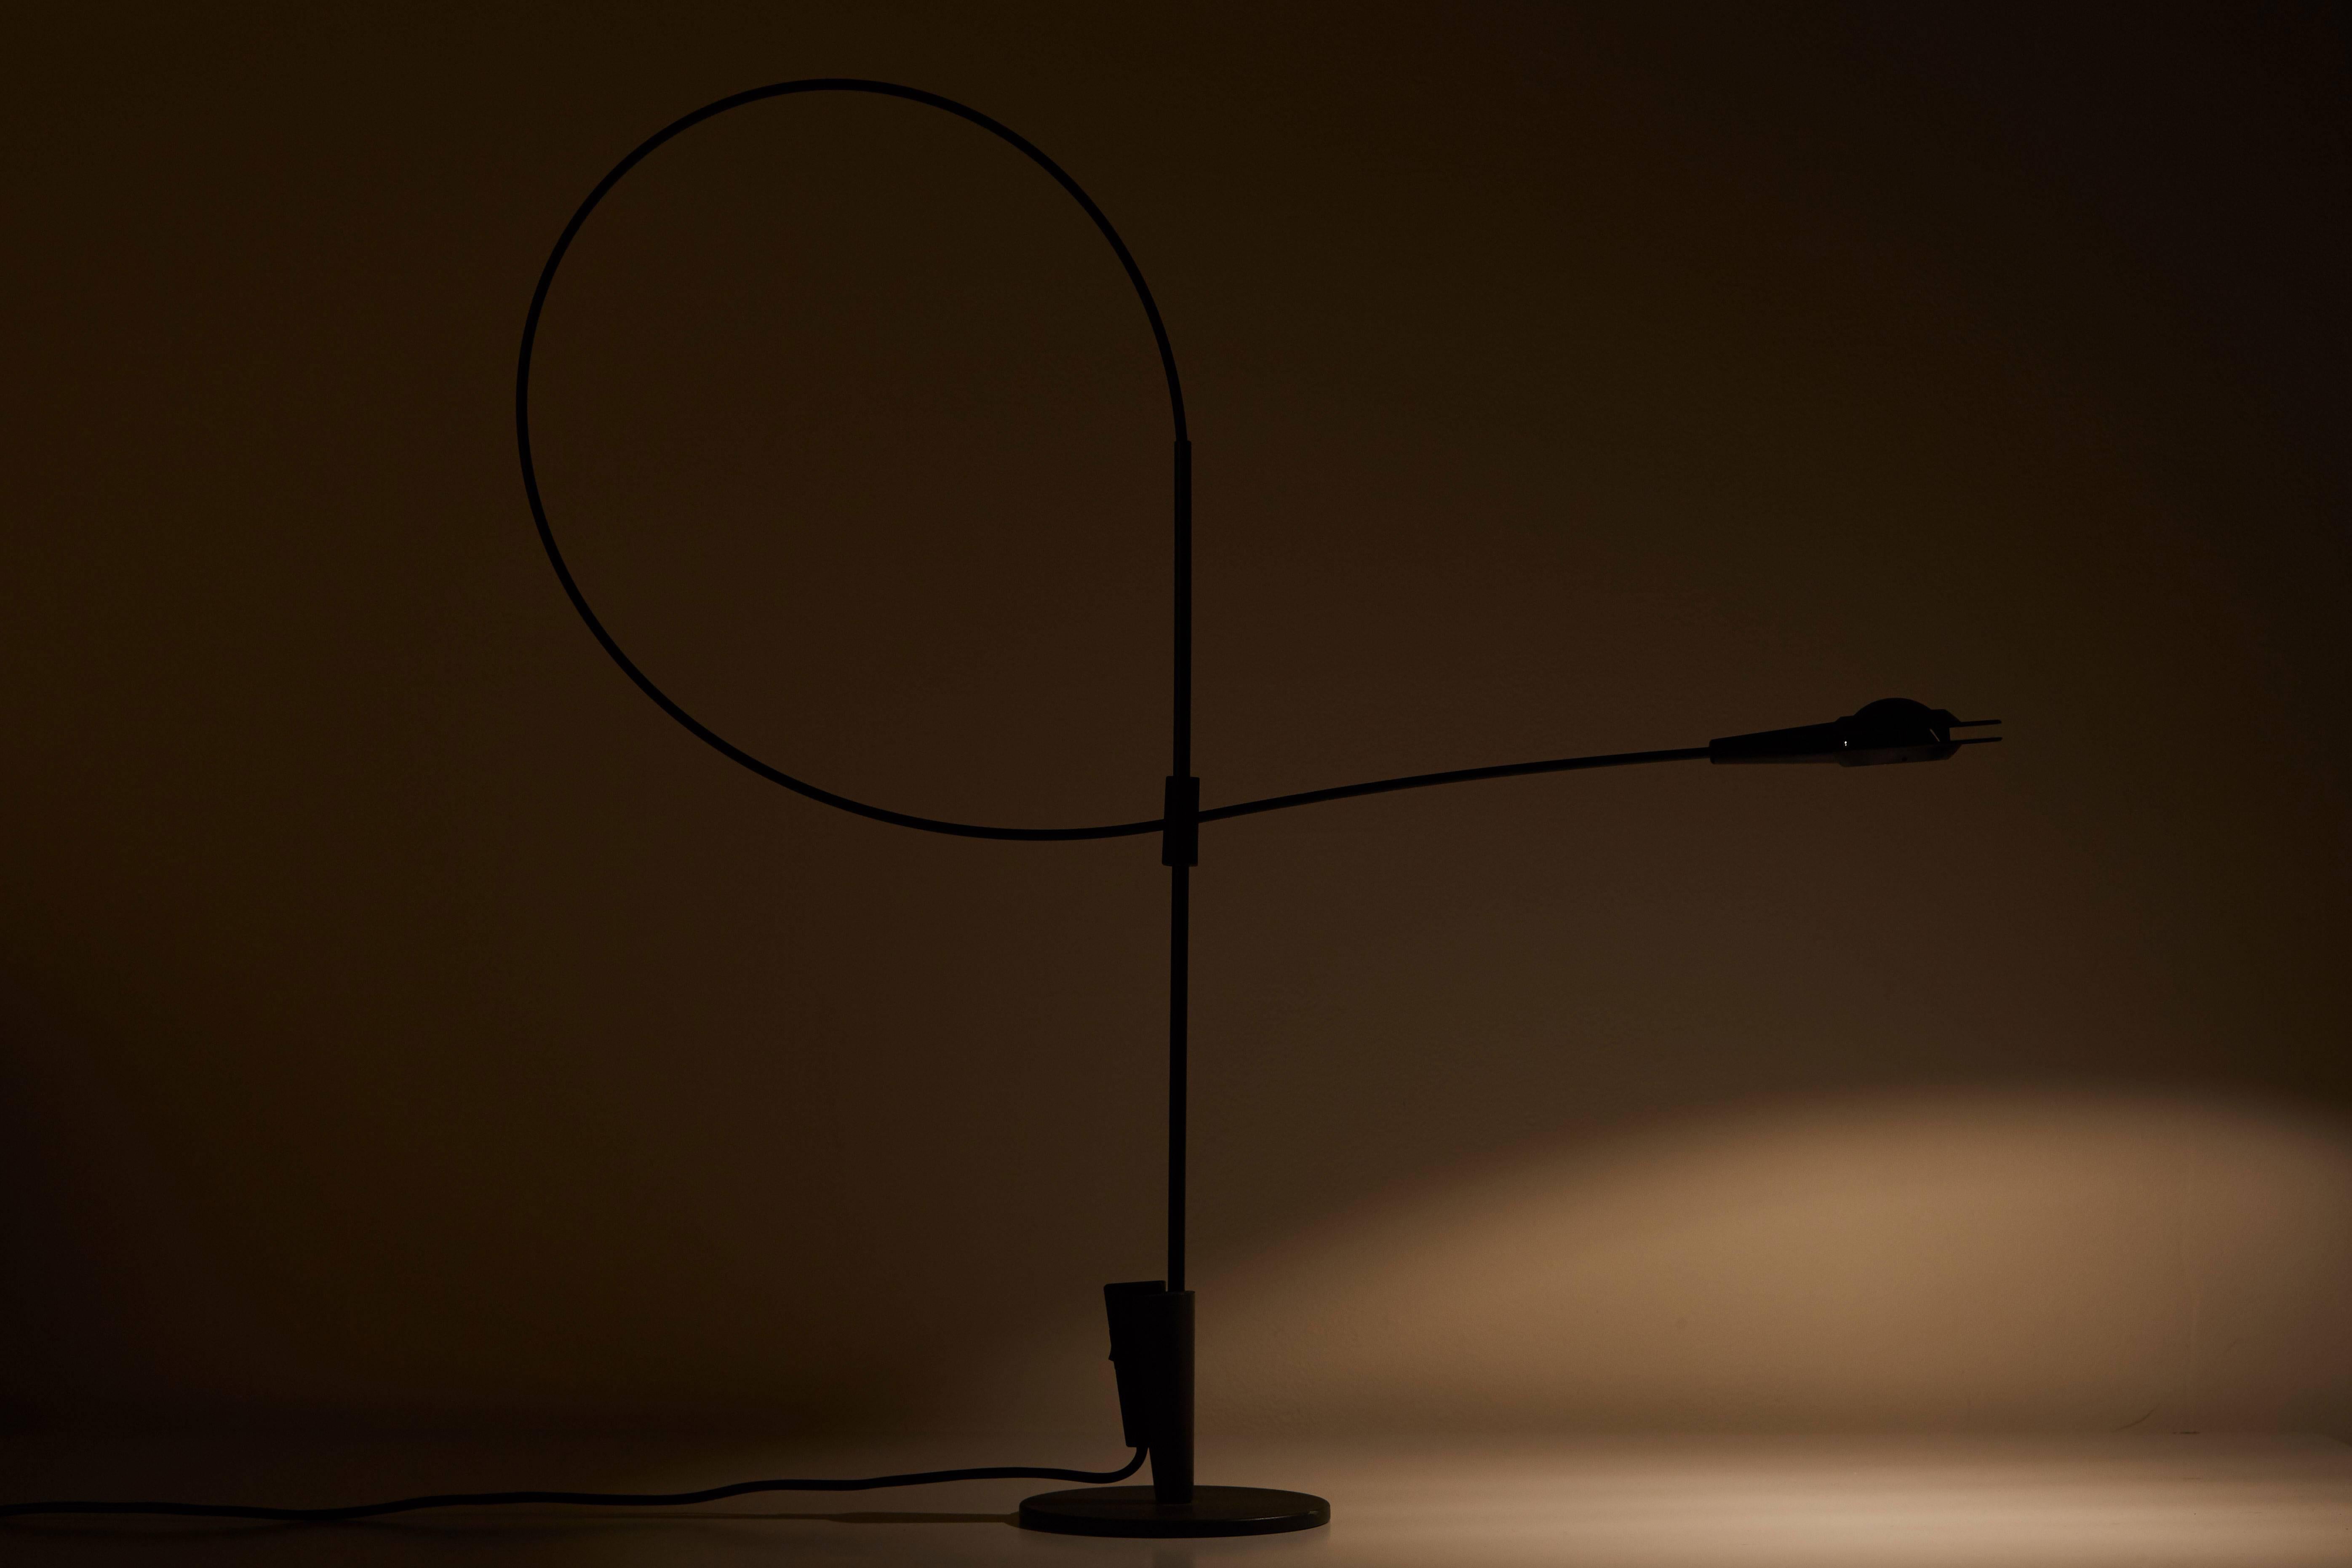 Single table lamp by Rene Kemna for Sirrah. Designed in Italy circa 1980s. Anodized metal and flexible fiberglass structure allows the light and shade to articulate into various positions. Light takes one G9 40w maximum halogen bulb.